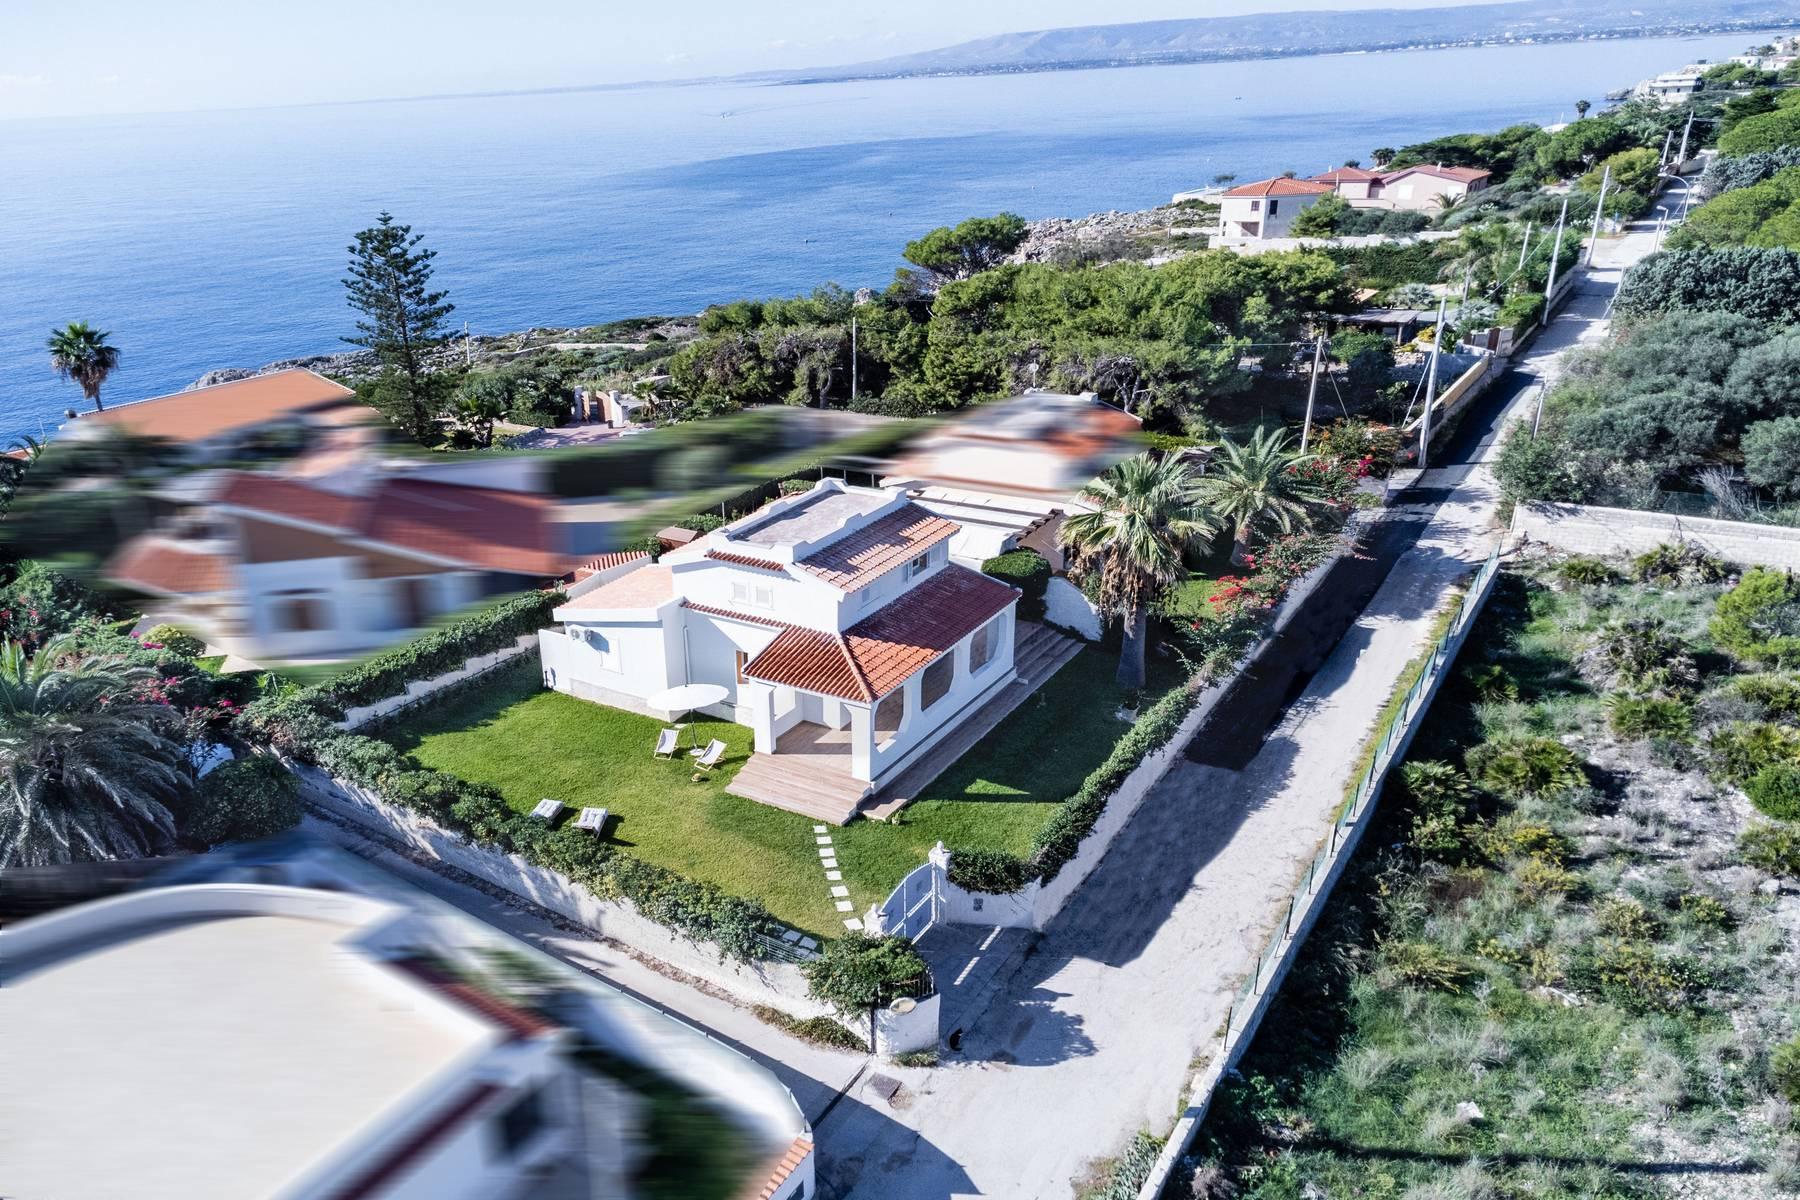 Villa in the Plemmirio Marine Protected Area with direct access to the sea - 14